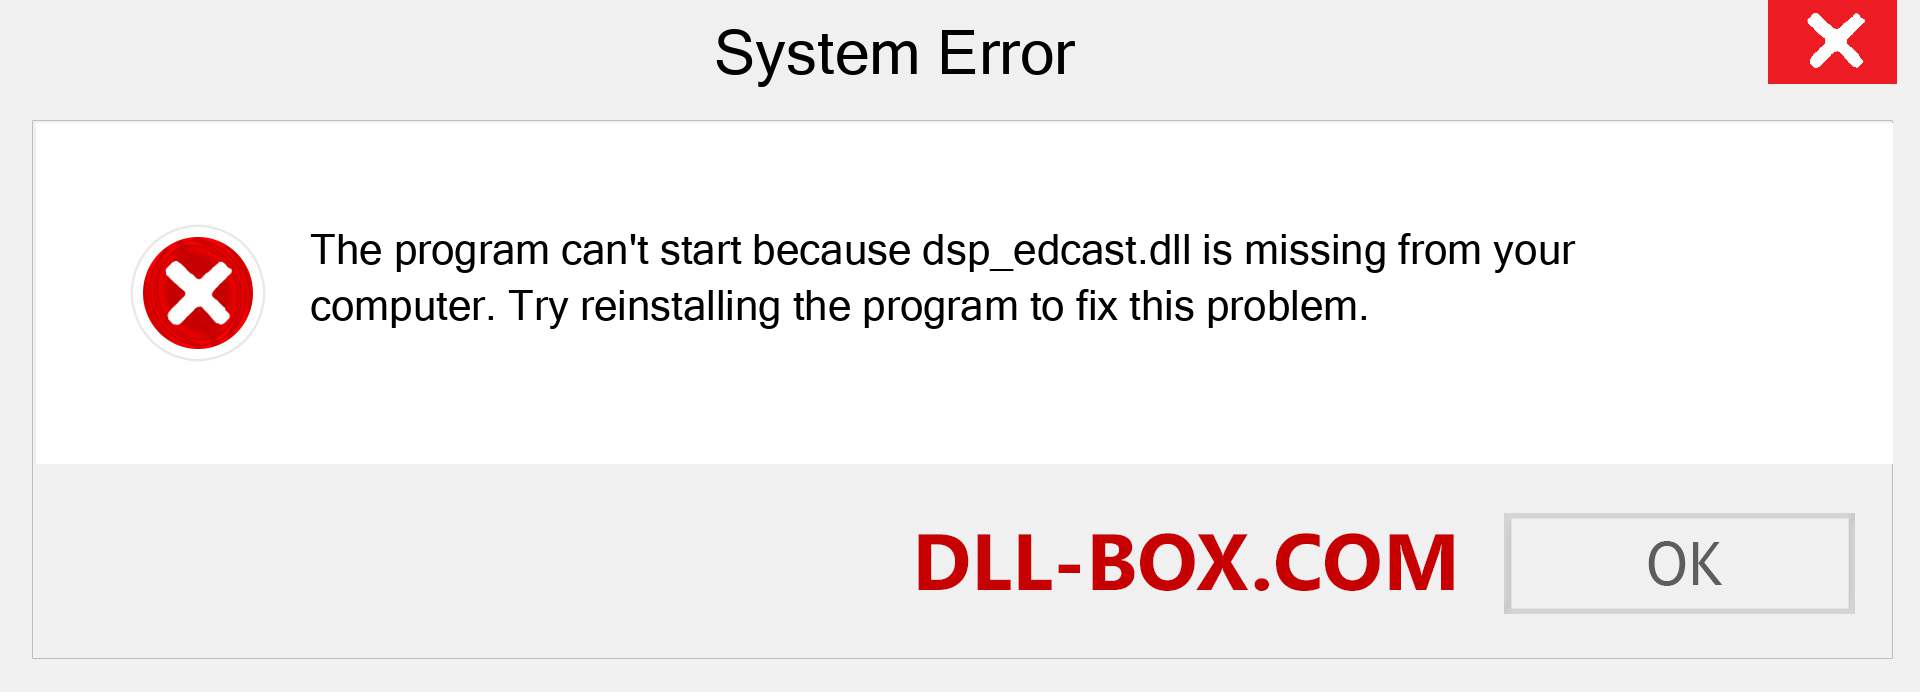  dsp_edcast.dll file is missing?. Download for Windows 7, 8, 10 - Fix  dsp_edcast dll Missing Error on Windows, photos, images